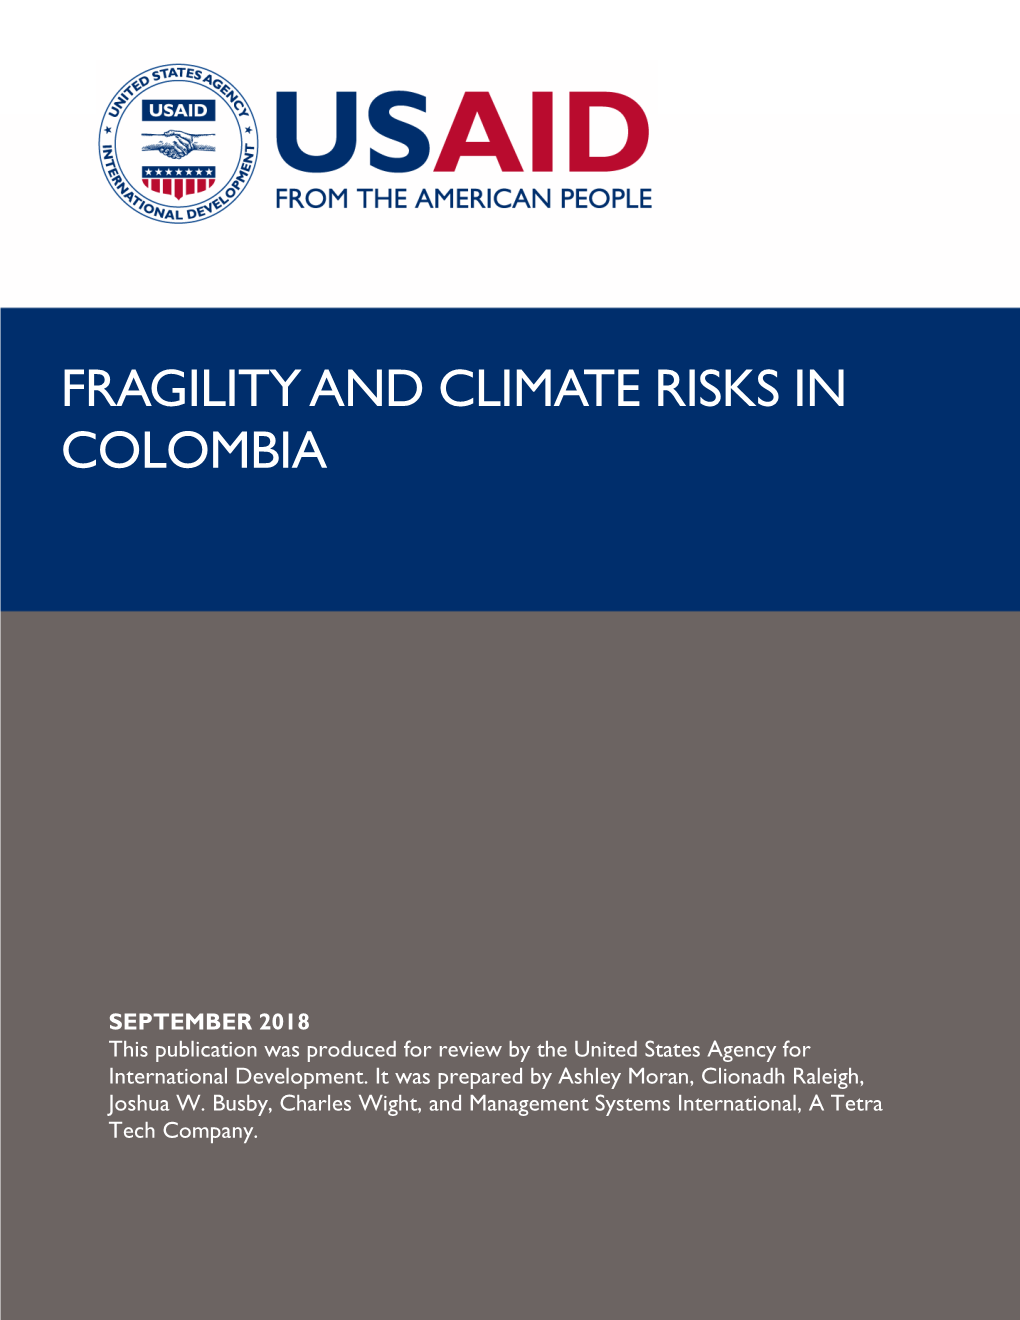 Fragility and Climate Risks in Colombia